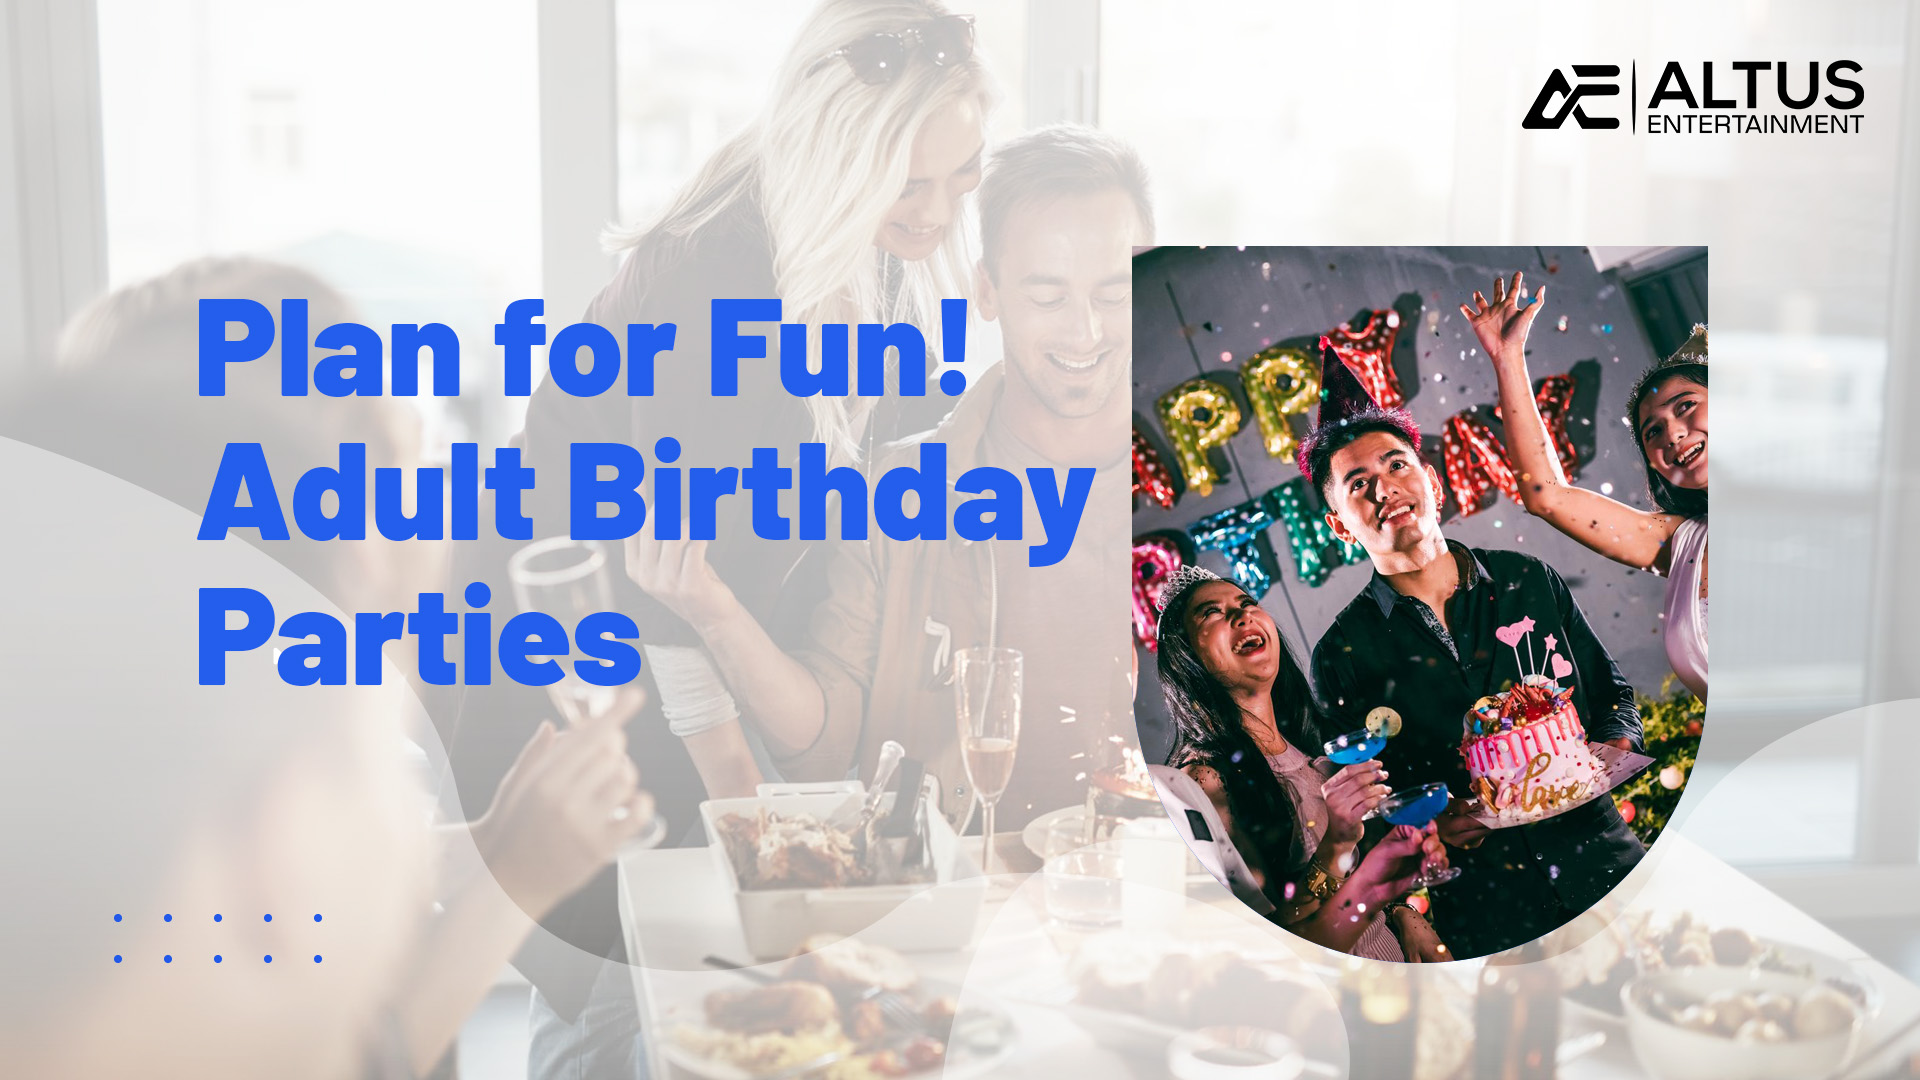 Adult birthday parties - plan for fun. Adult man and two women celebrating birthday.